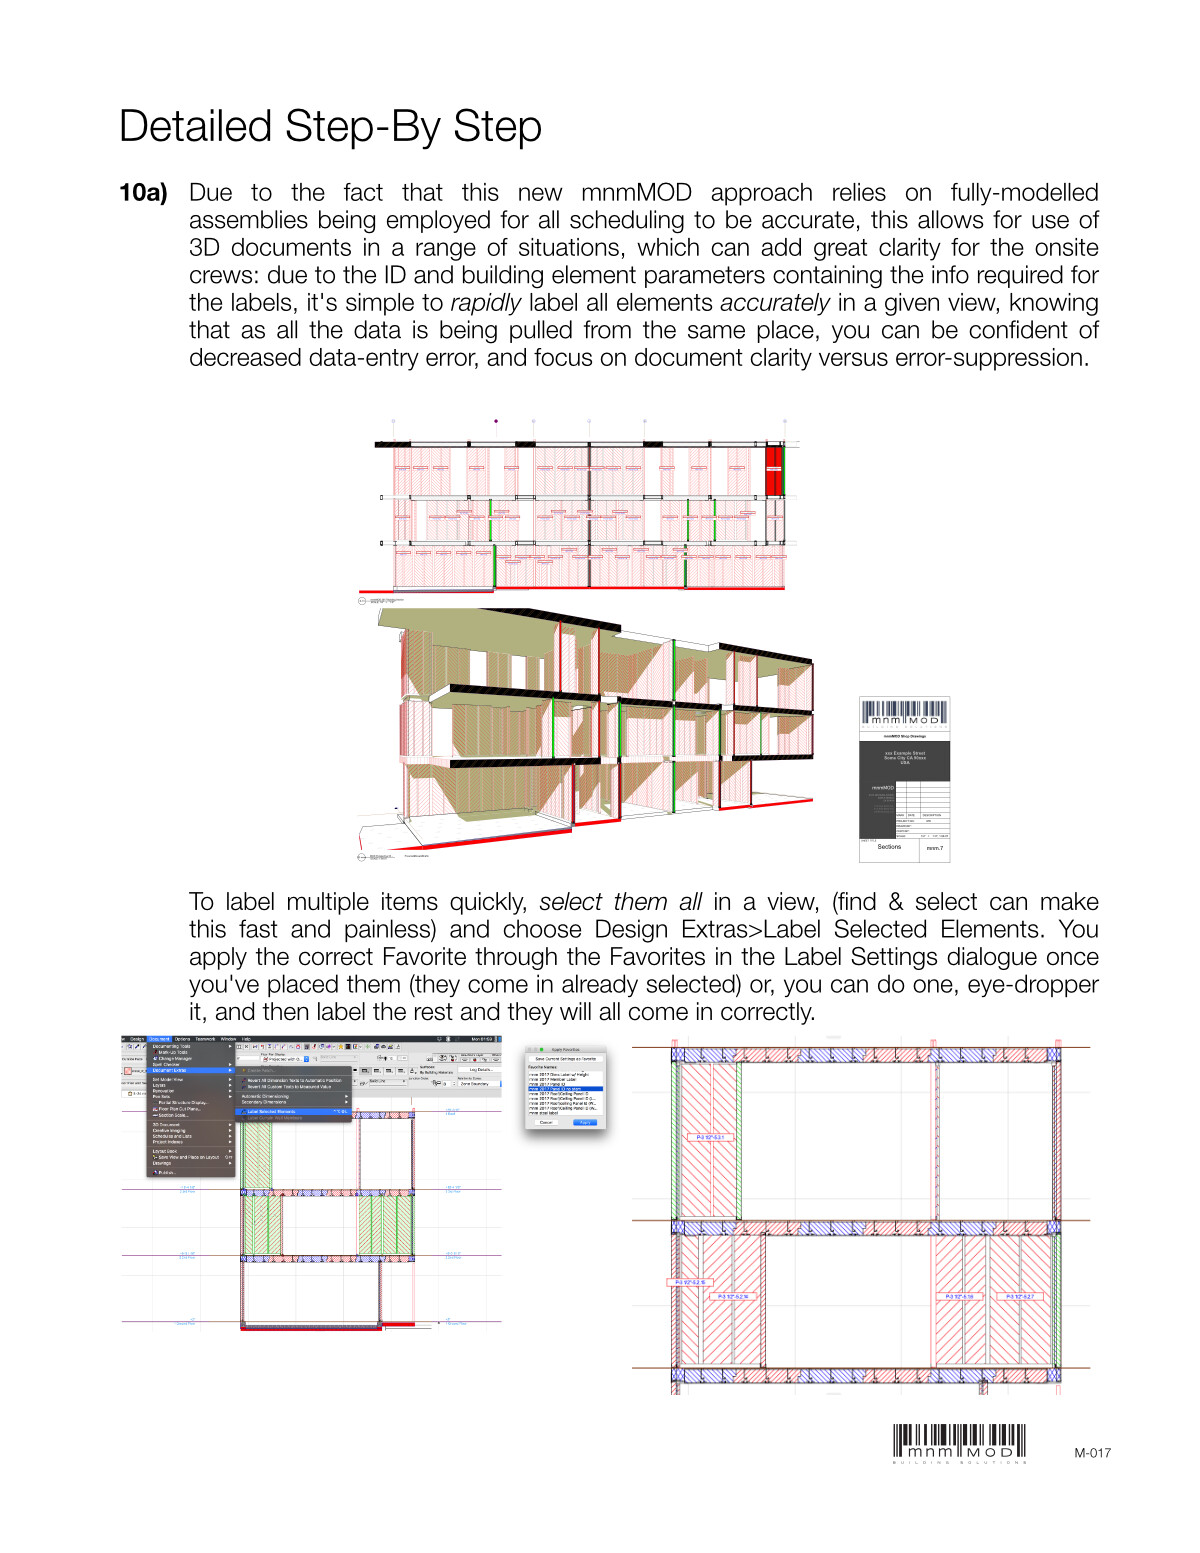 Old Work - Excerpt only of technical documentation of new mnmMOD system design tools, new design approach and new documentation [all my work]